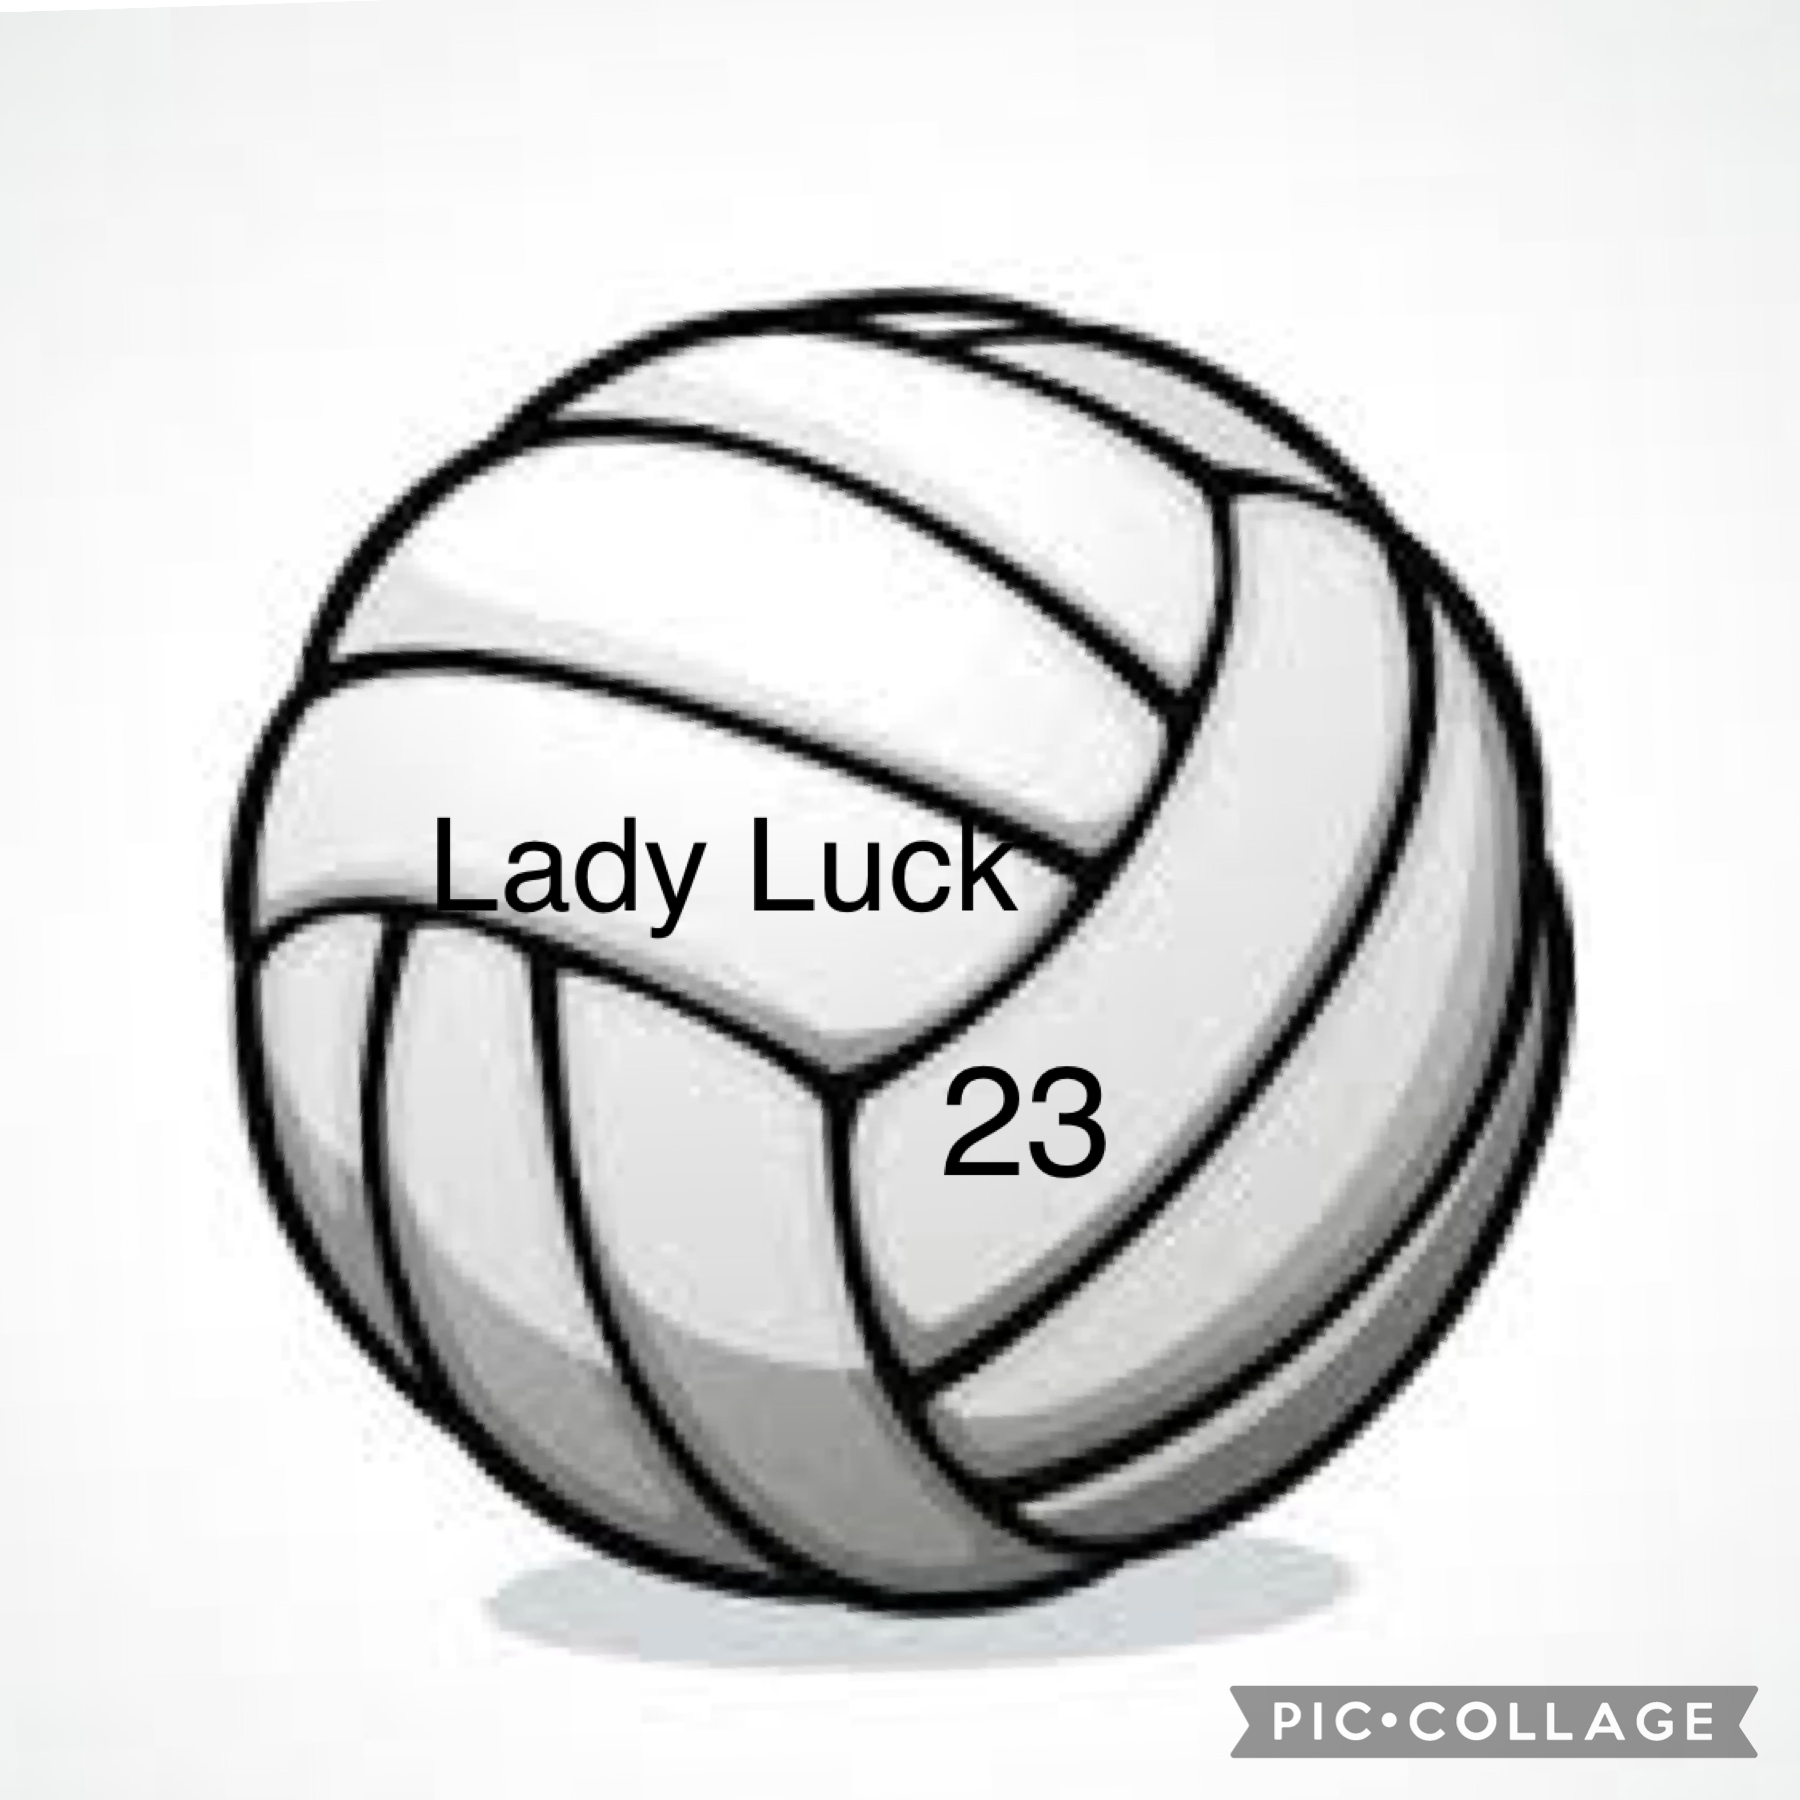 Lady Luck is my monster truck name 🏐🏐🏐🏐